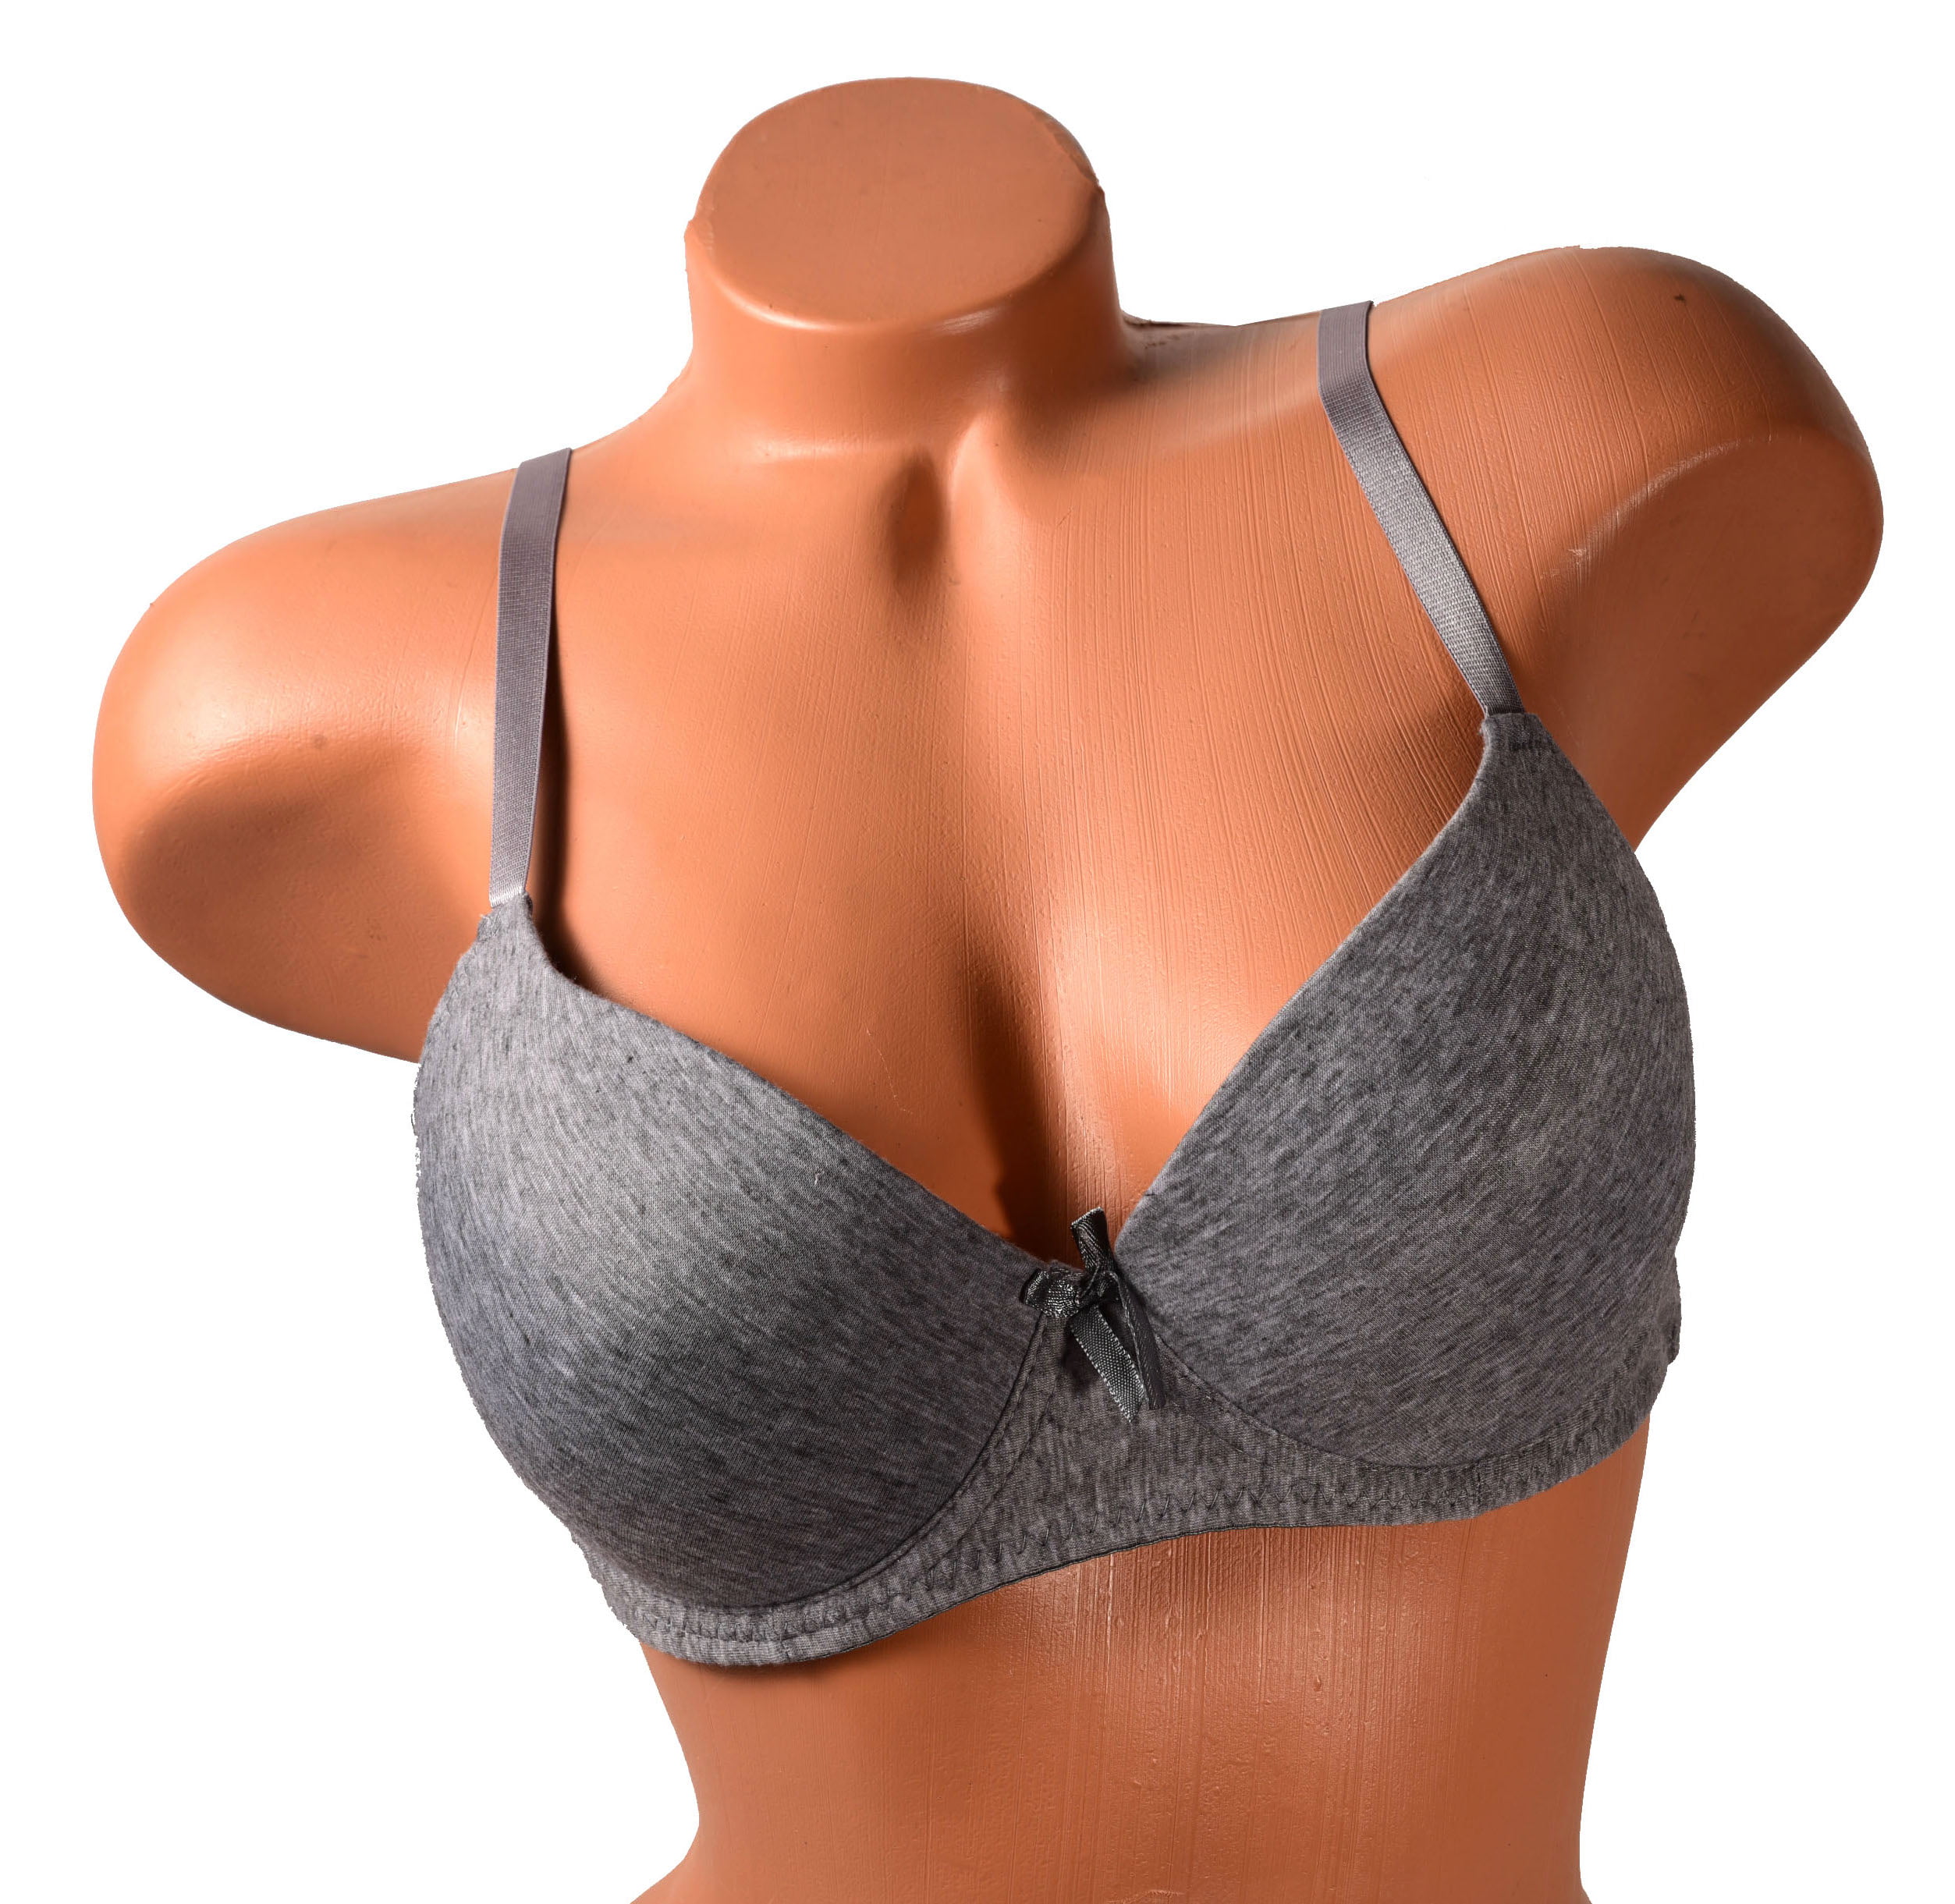 Women Bras 6 Pack of Bra D cup DD cup DDD cup Size 36D (F8203